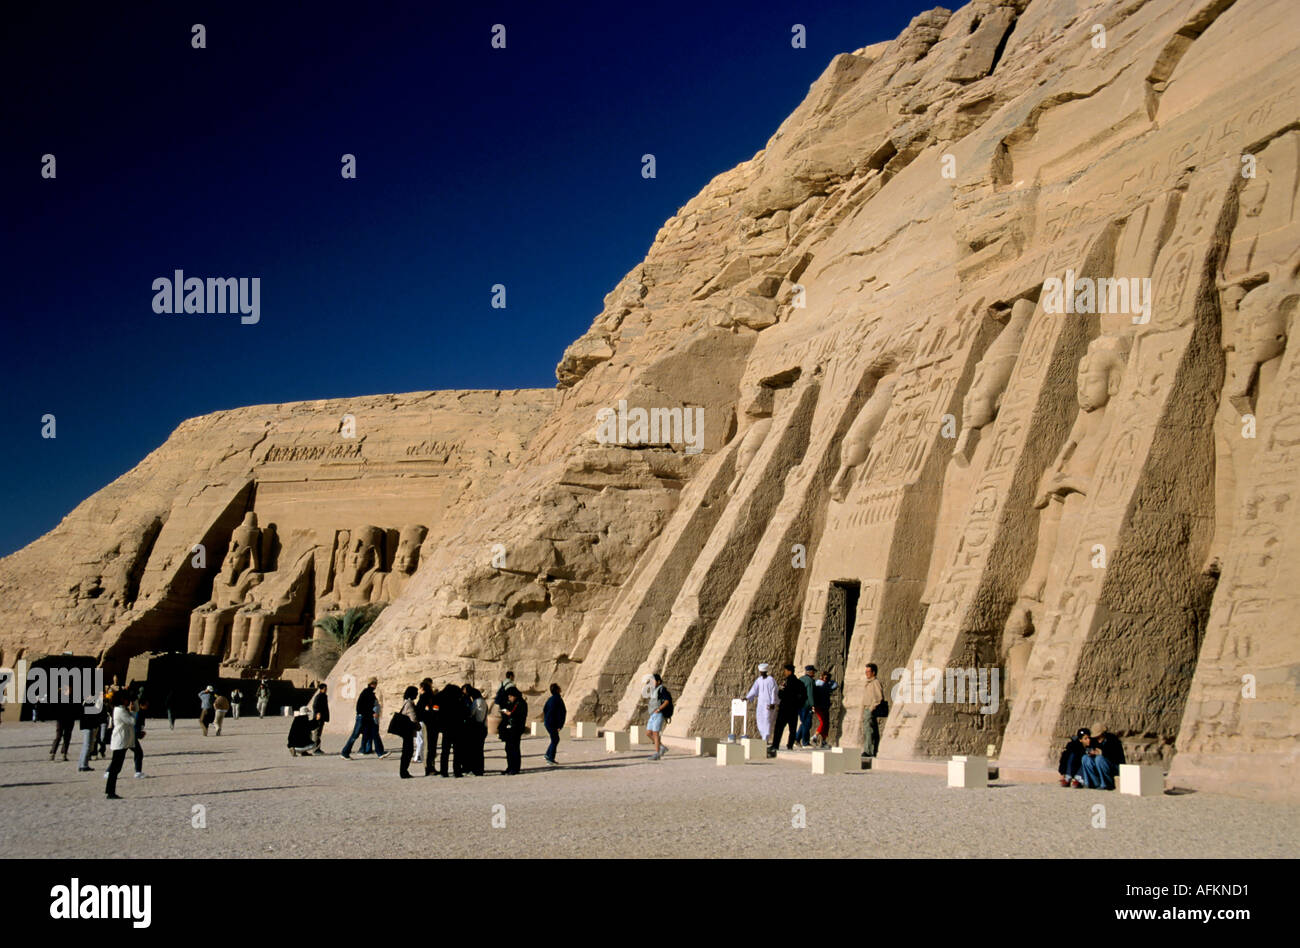 Tourists visiting the Abu Simbel temples in Nubia, Egypt. Stock Photo